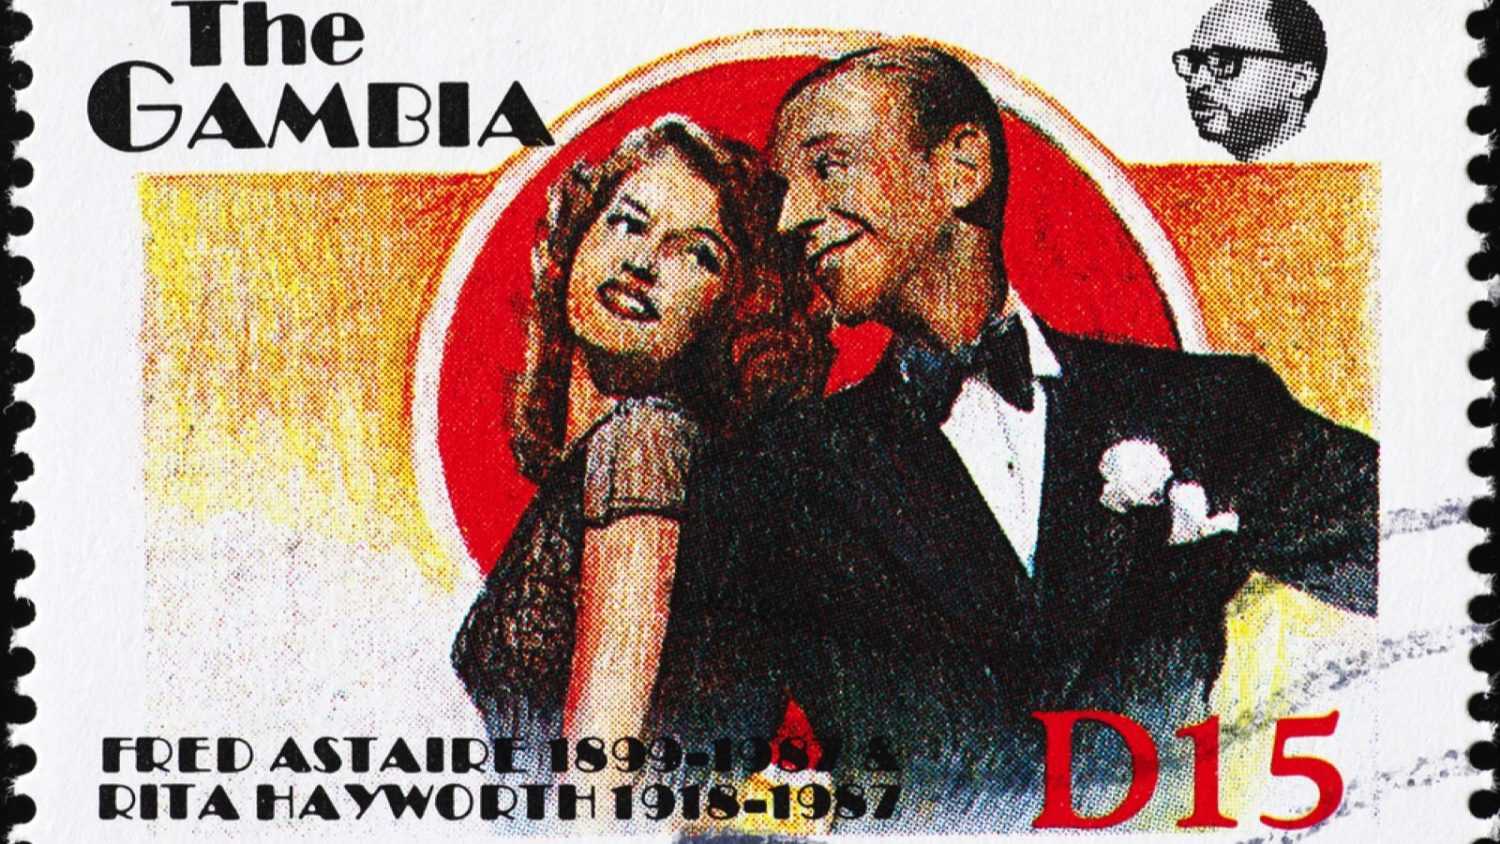 Milan, Italy - May 20, 2020: Fred Astaire and Rita Hayworth on postage stamp of Gambia